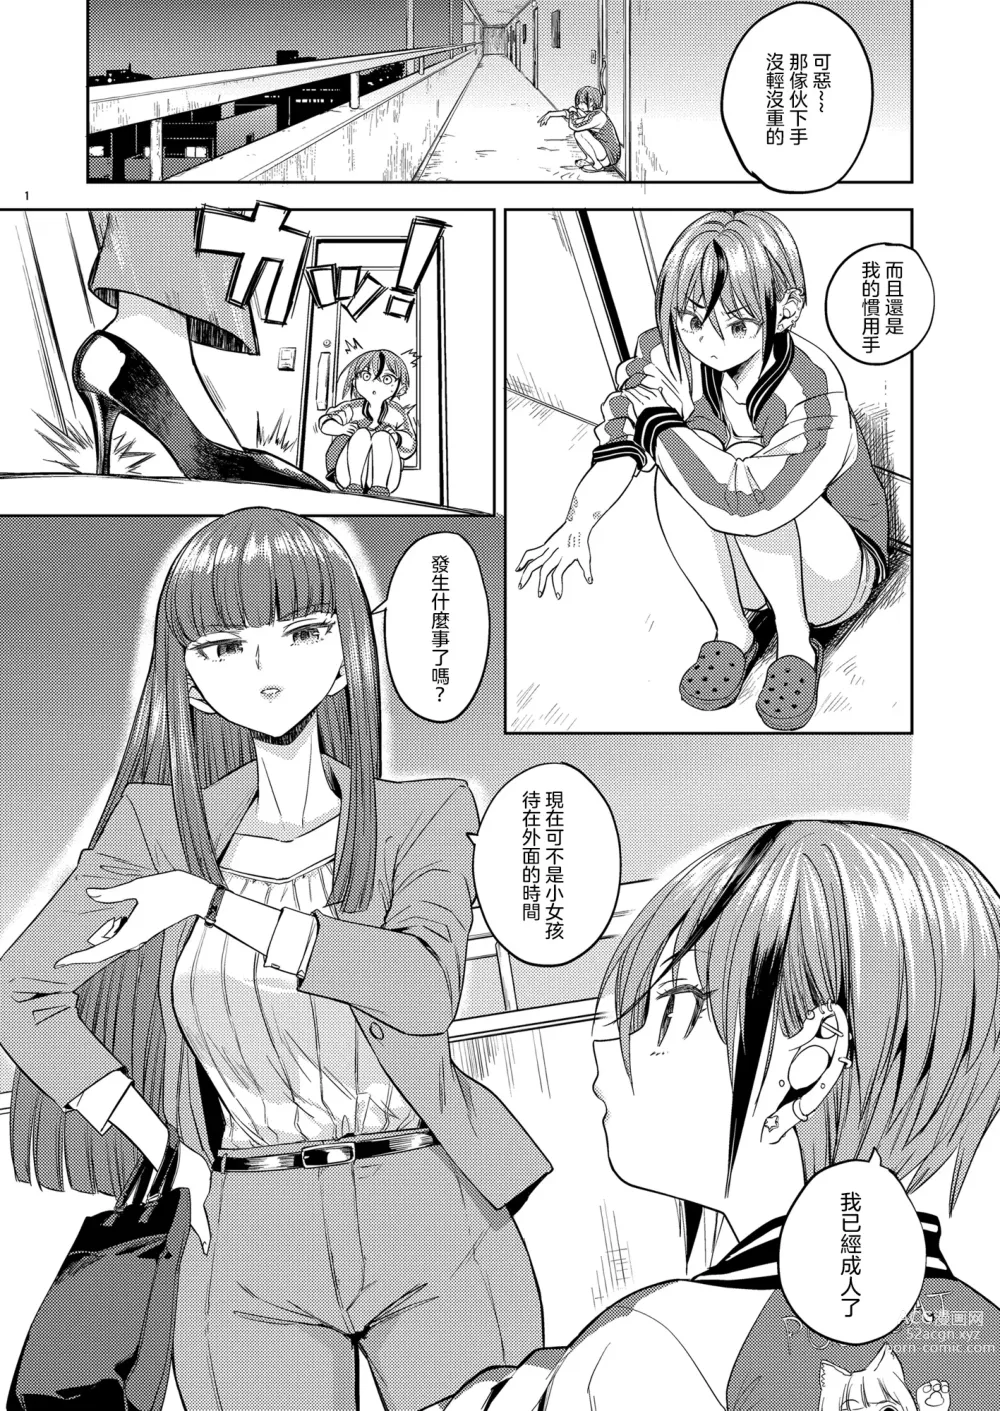 Page 3 of doujinshi 當我們全裸相擁抱之時